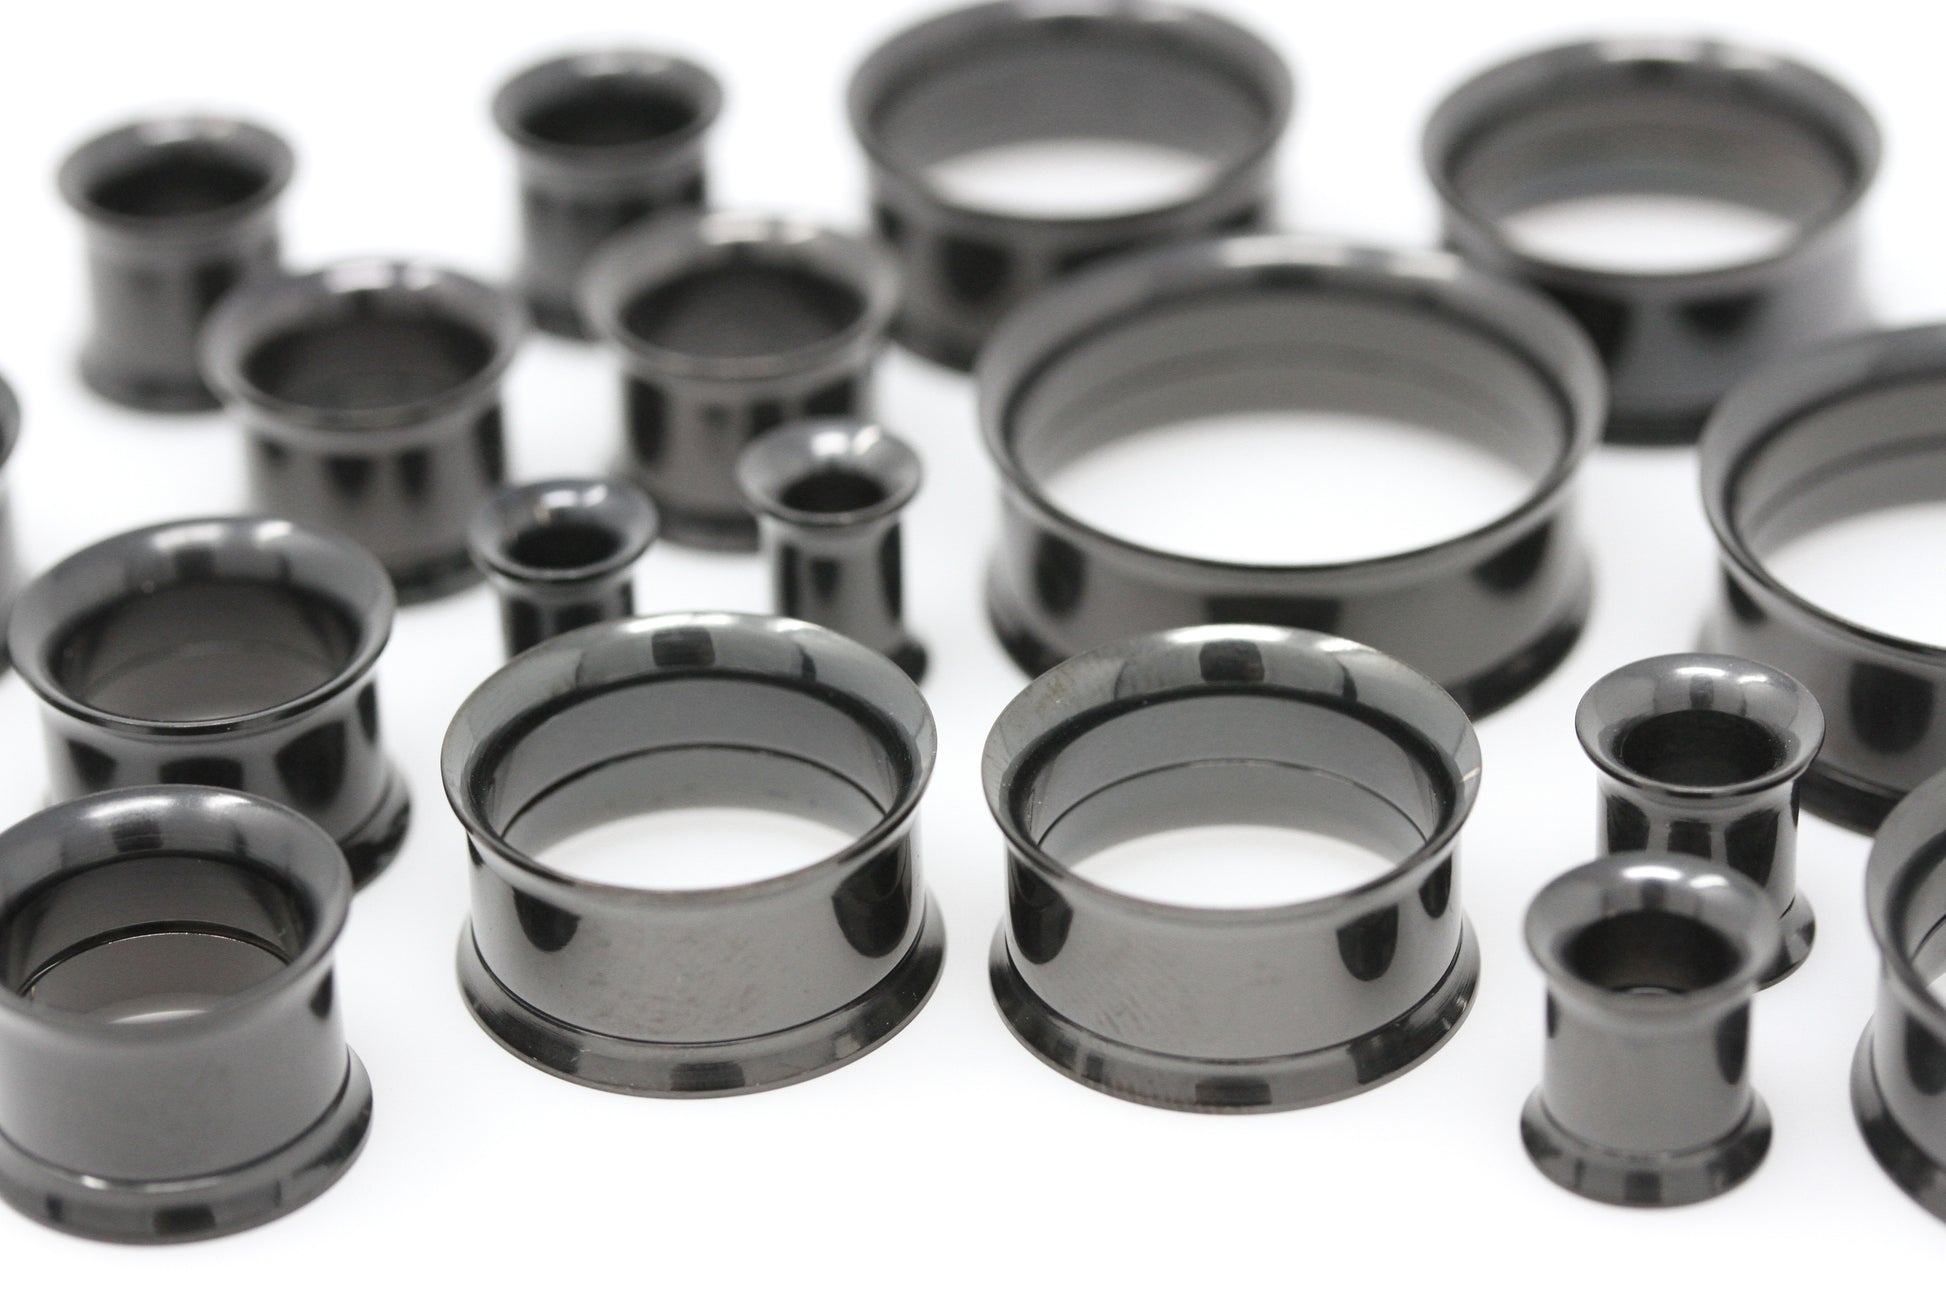 Black Colored Stainless Steel Tunnel Plugs